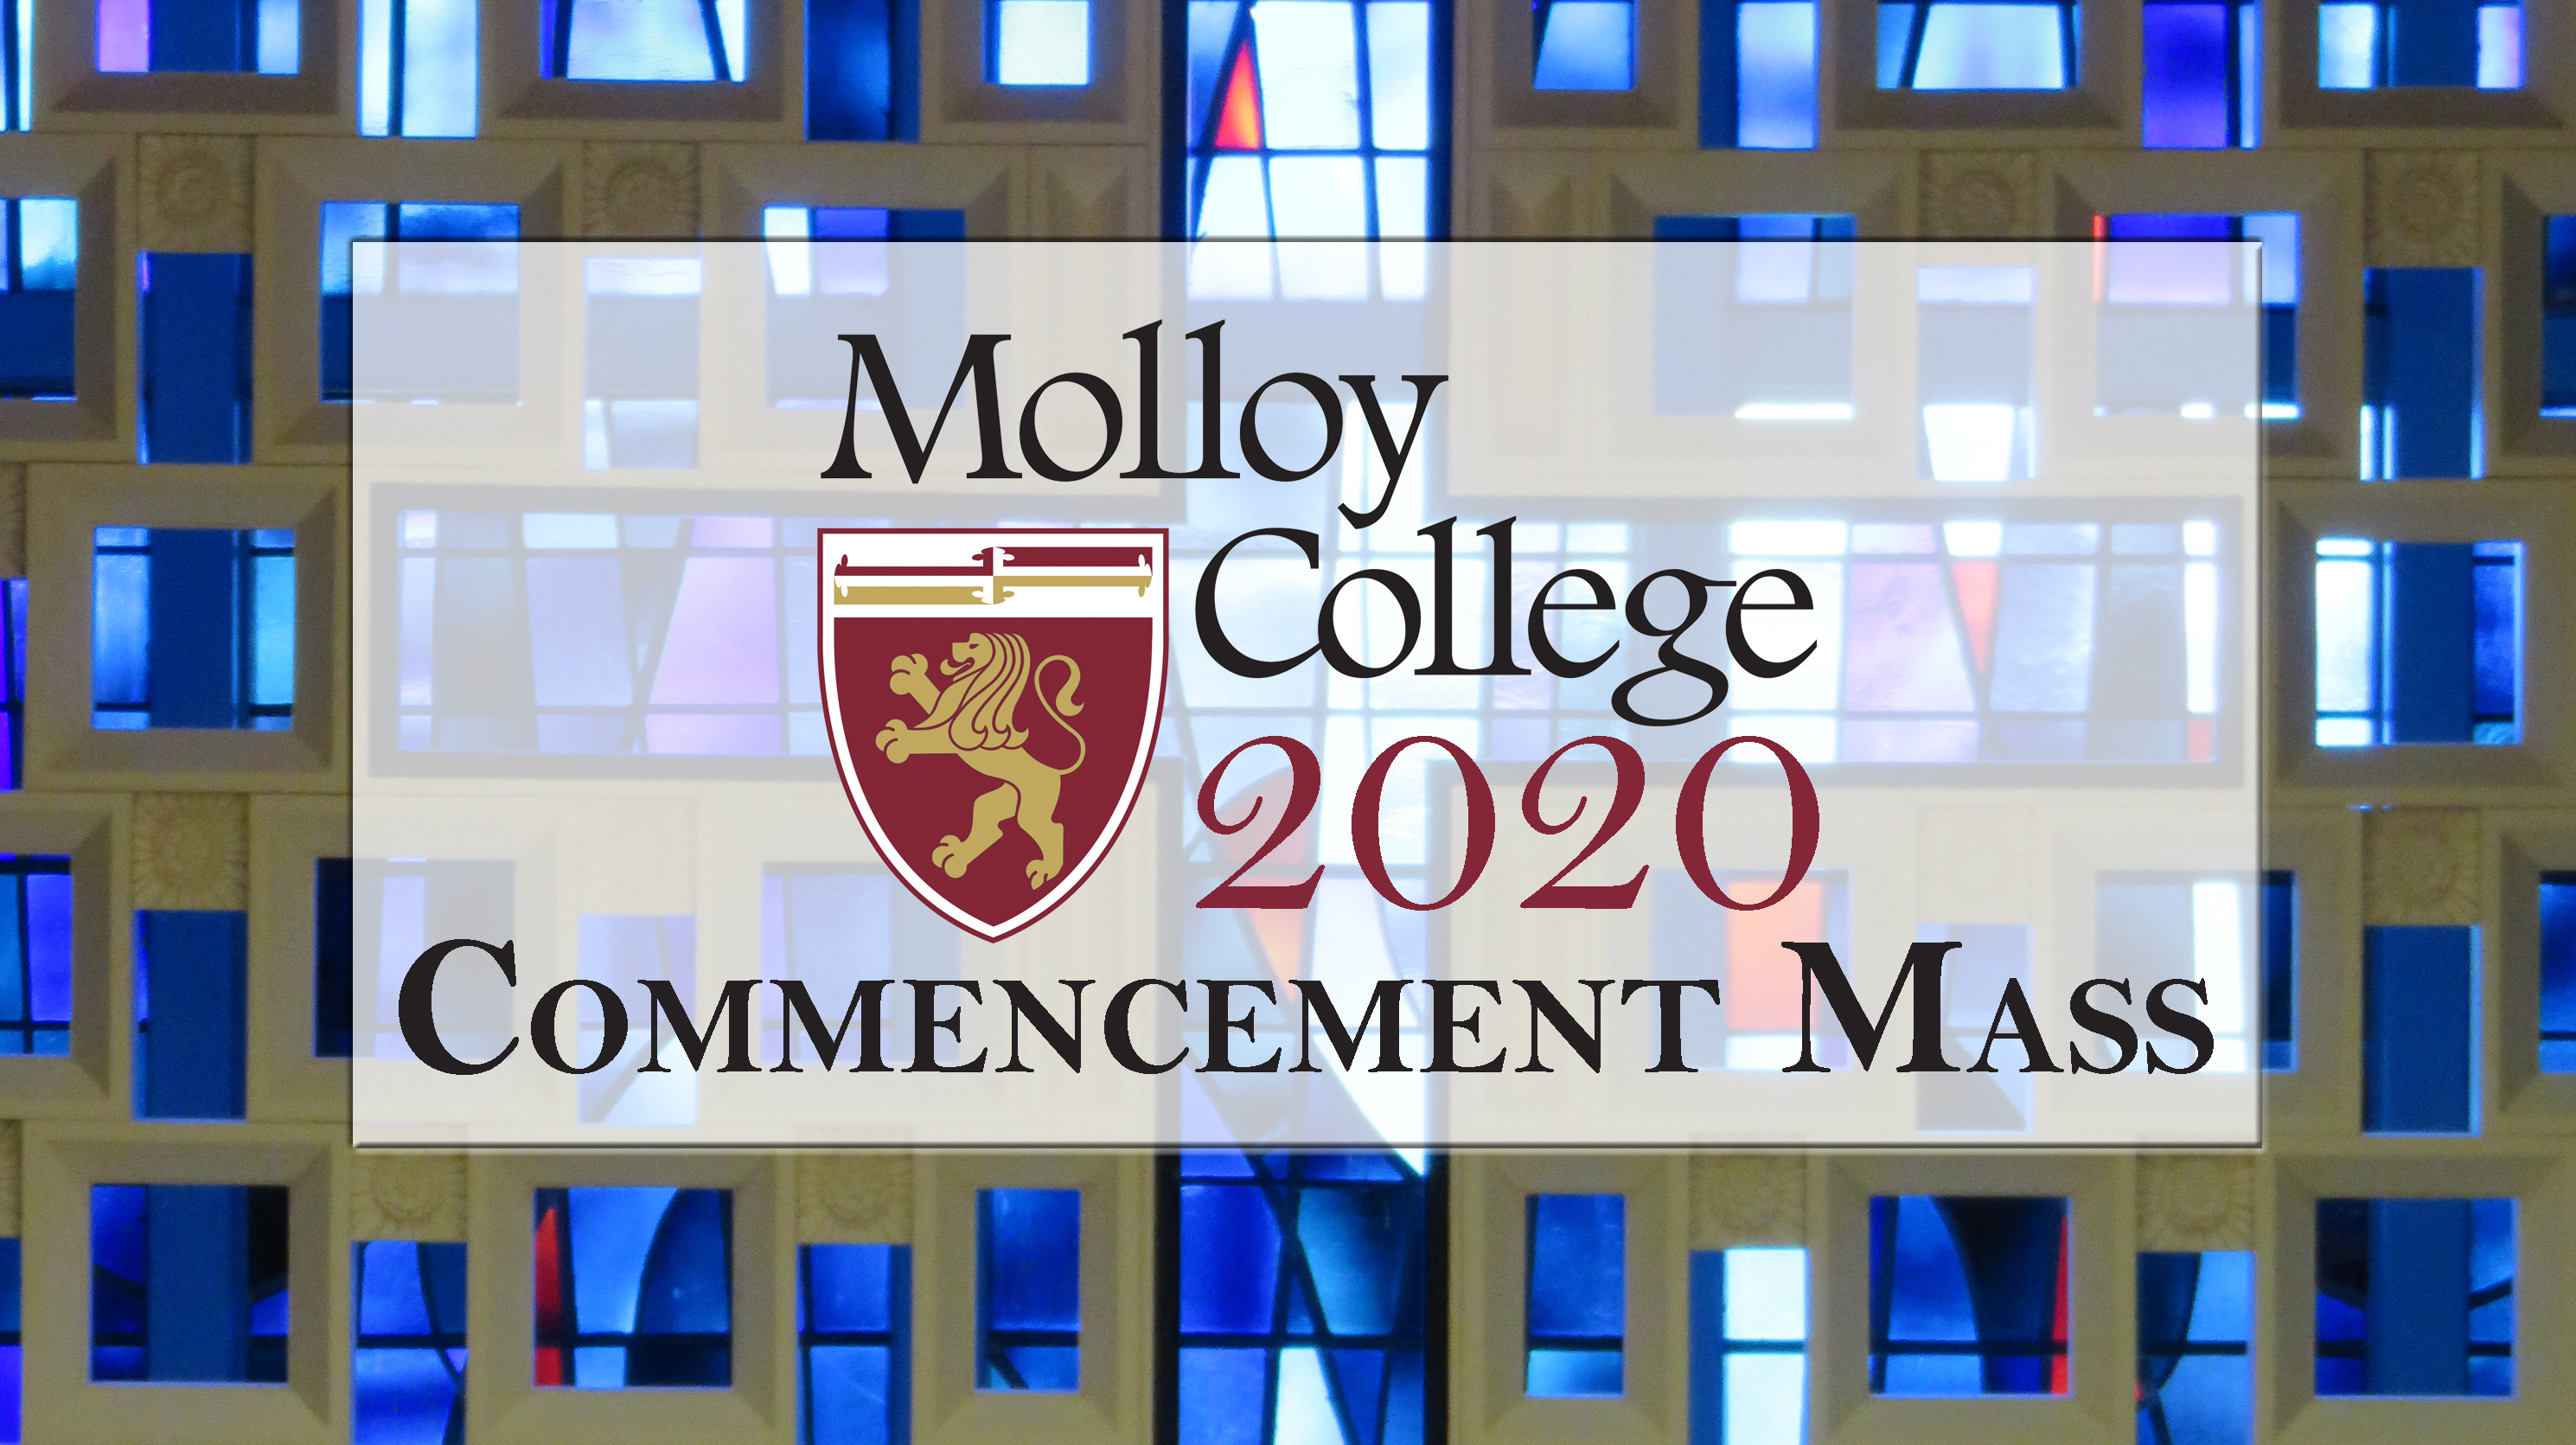 Molloy College Commencement Mass on Livestream